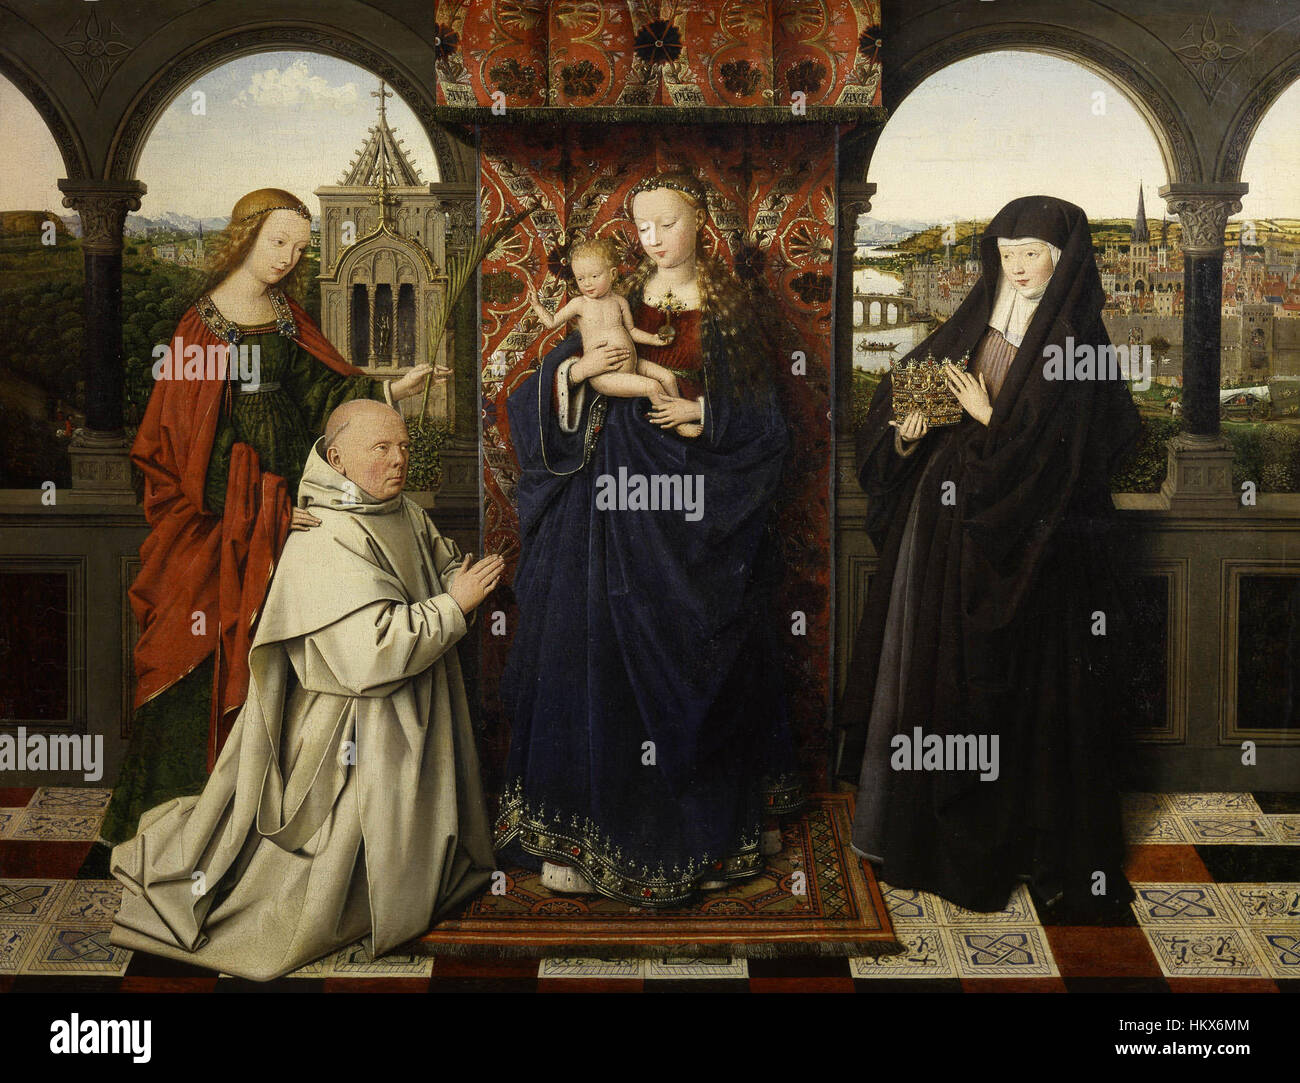 Jan van Eyck - Virgin and Child, with Saints and Donor - 1441 - Frick Collection Stock Photo